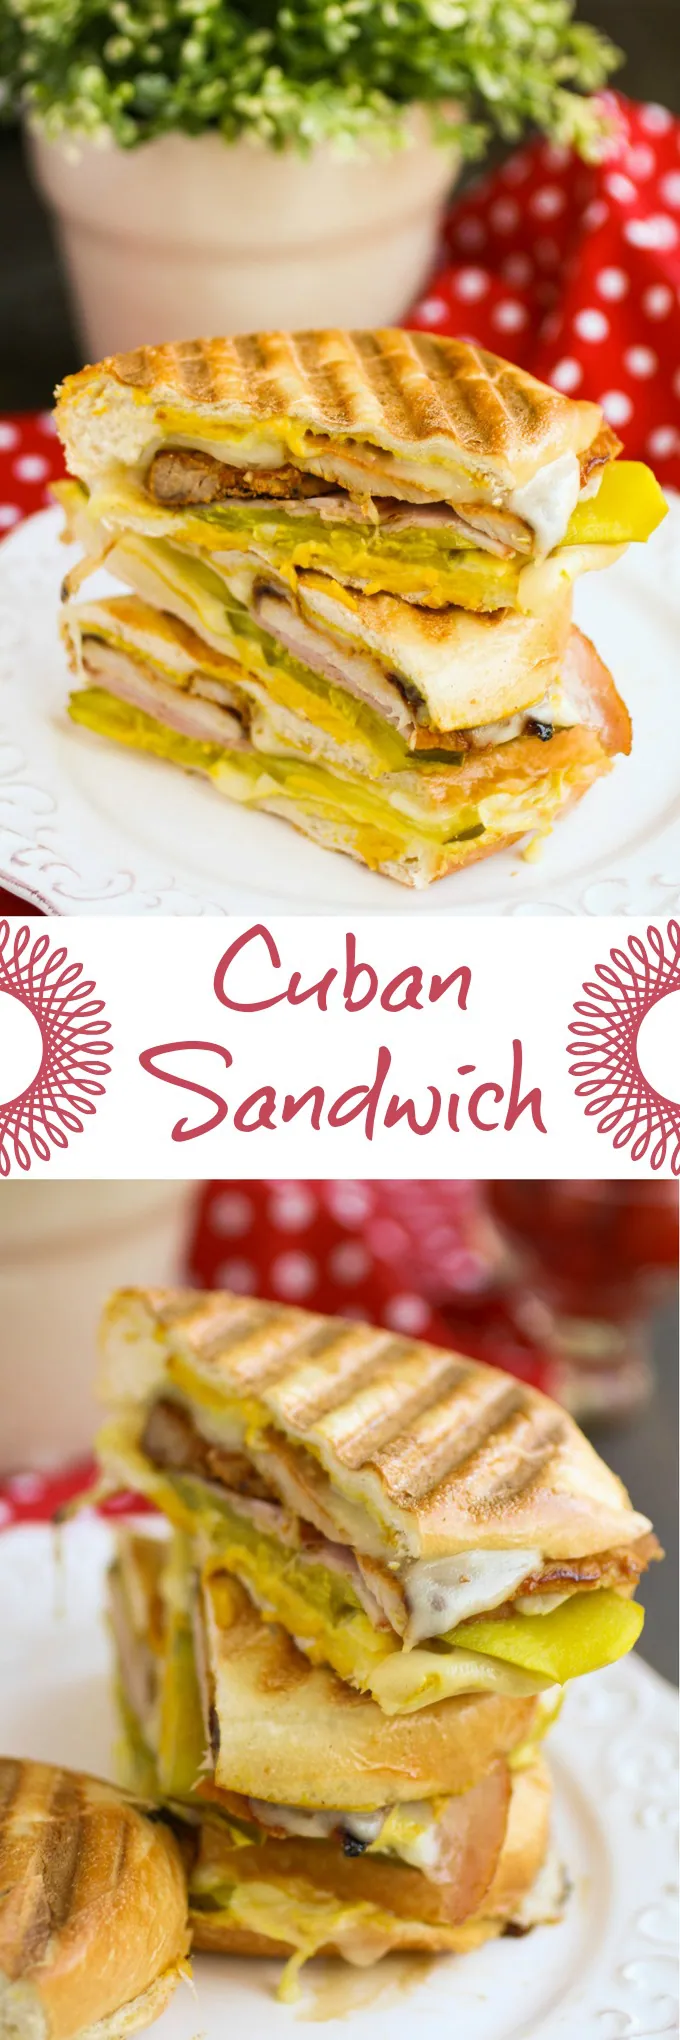 A Cuban sandwich is a treat for lunch or dinner! Big flavor meets heartiness in this classic sandwich!